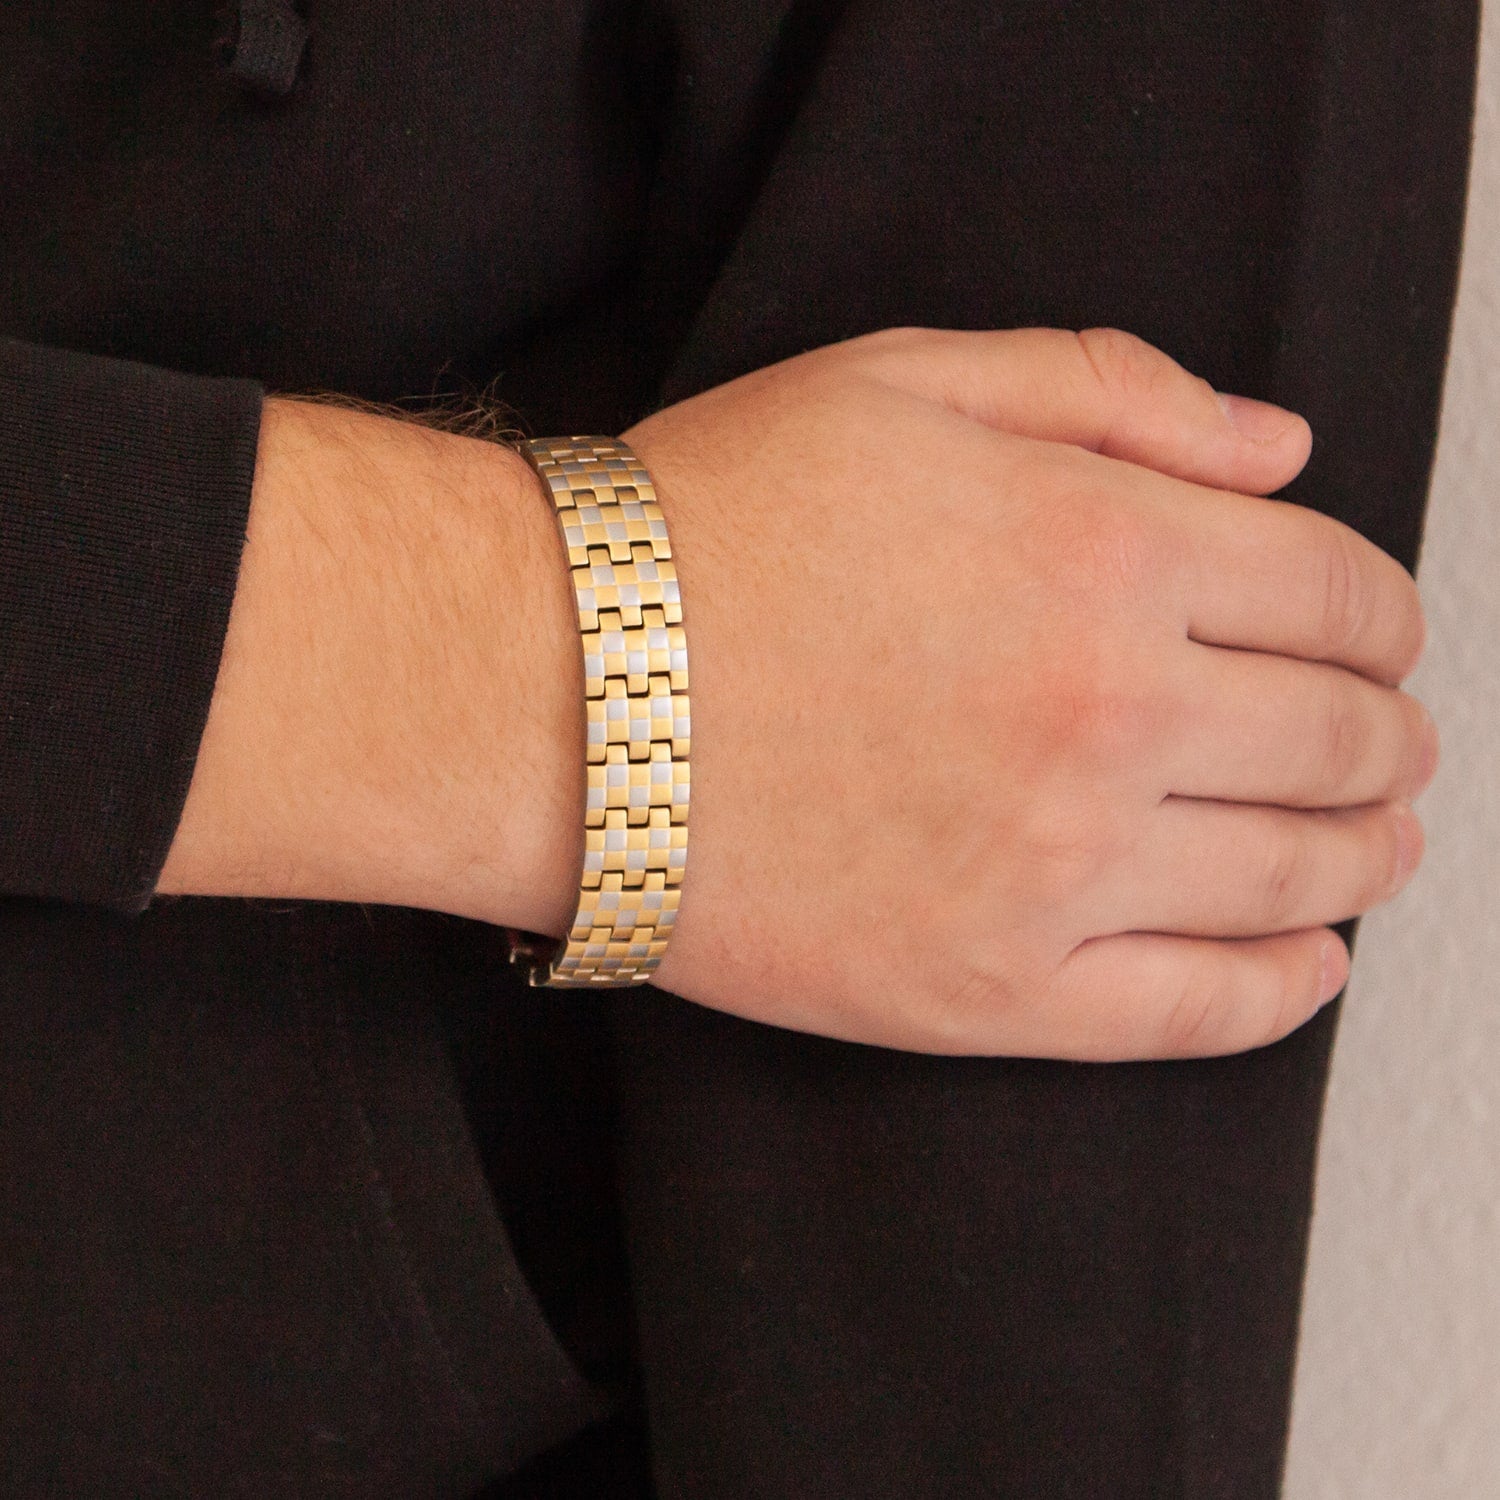 Mysterious Matte - Negative Ion Bracelet, Silver & Gold Plated